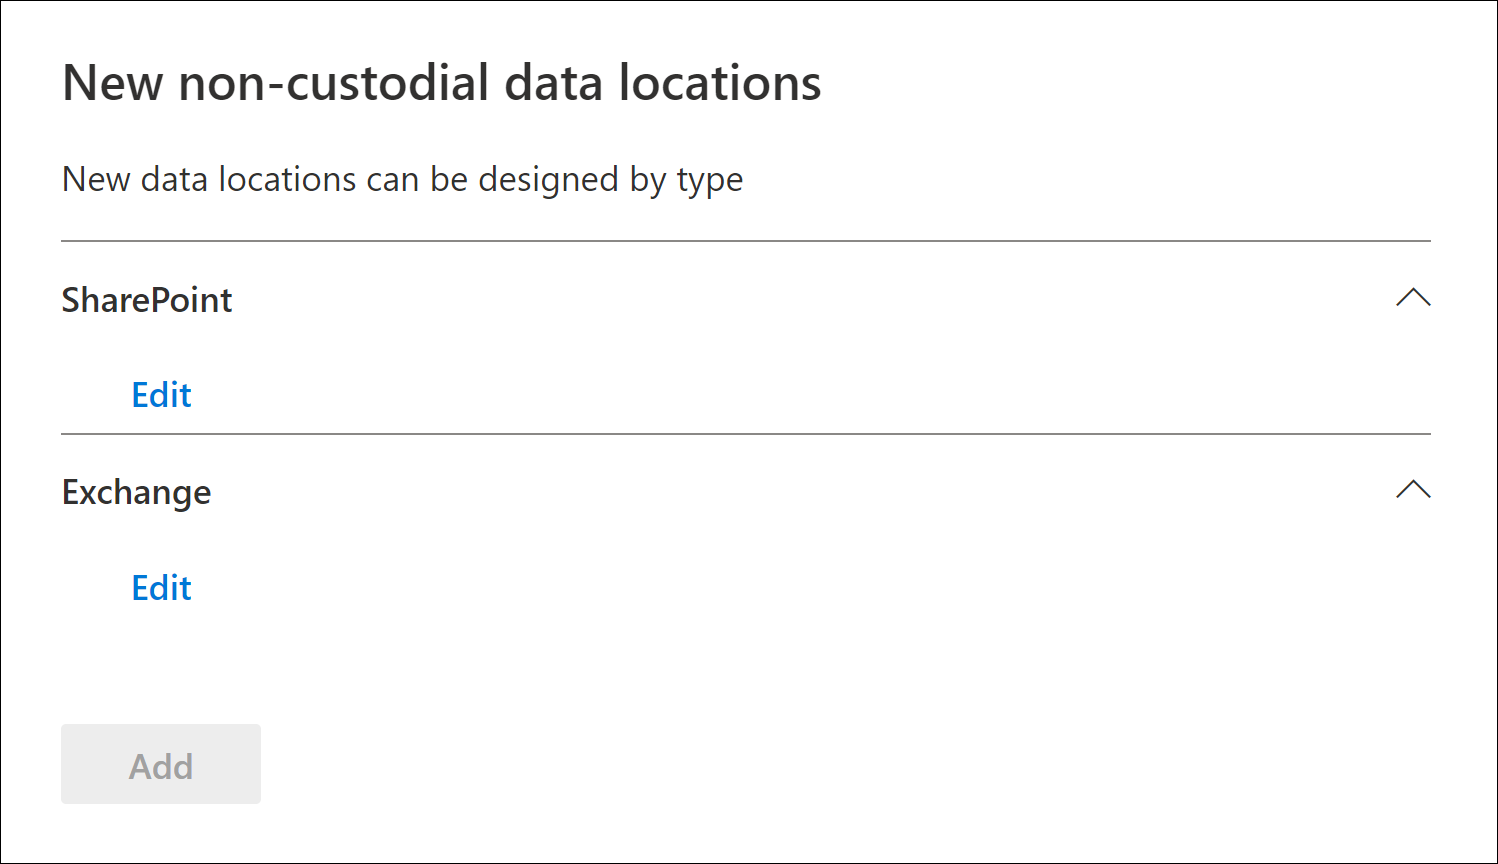 Add SharePoint sites and Exchange mailboxes as non-custodial data sources.